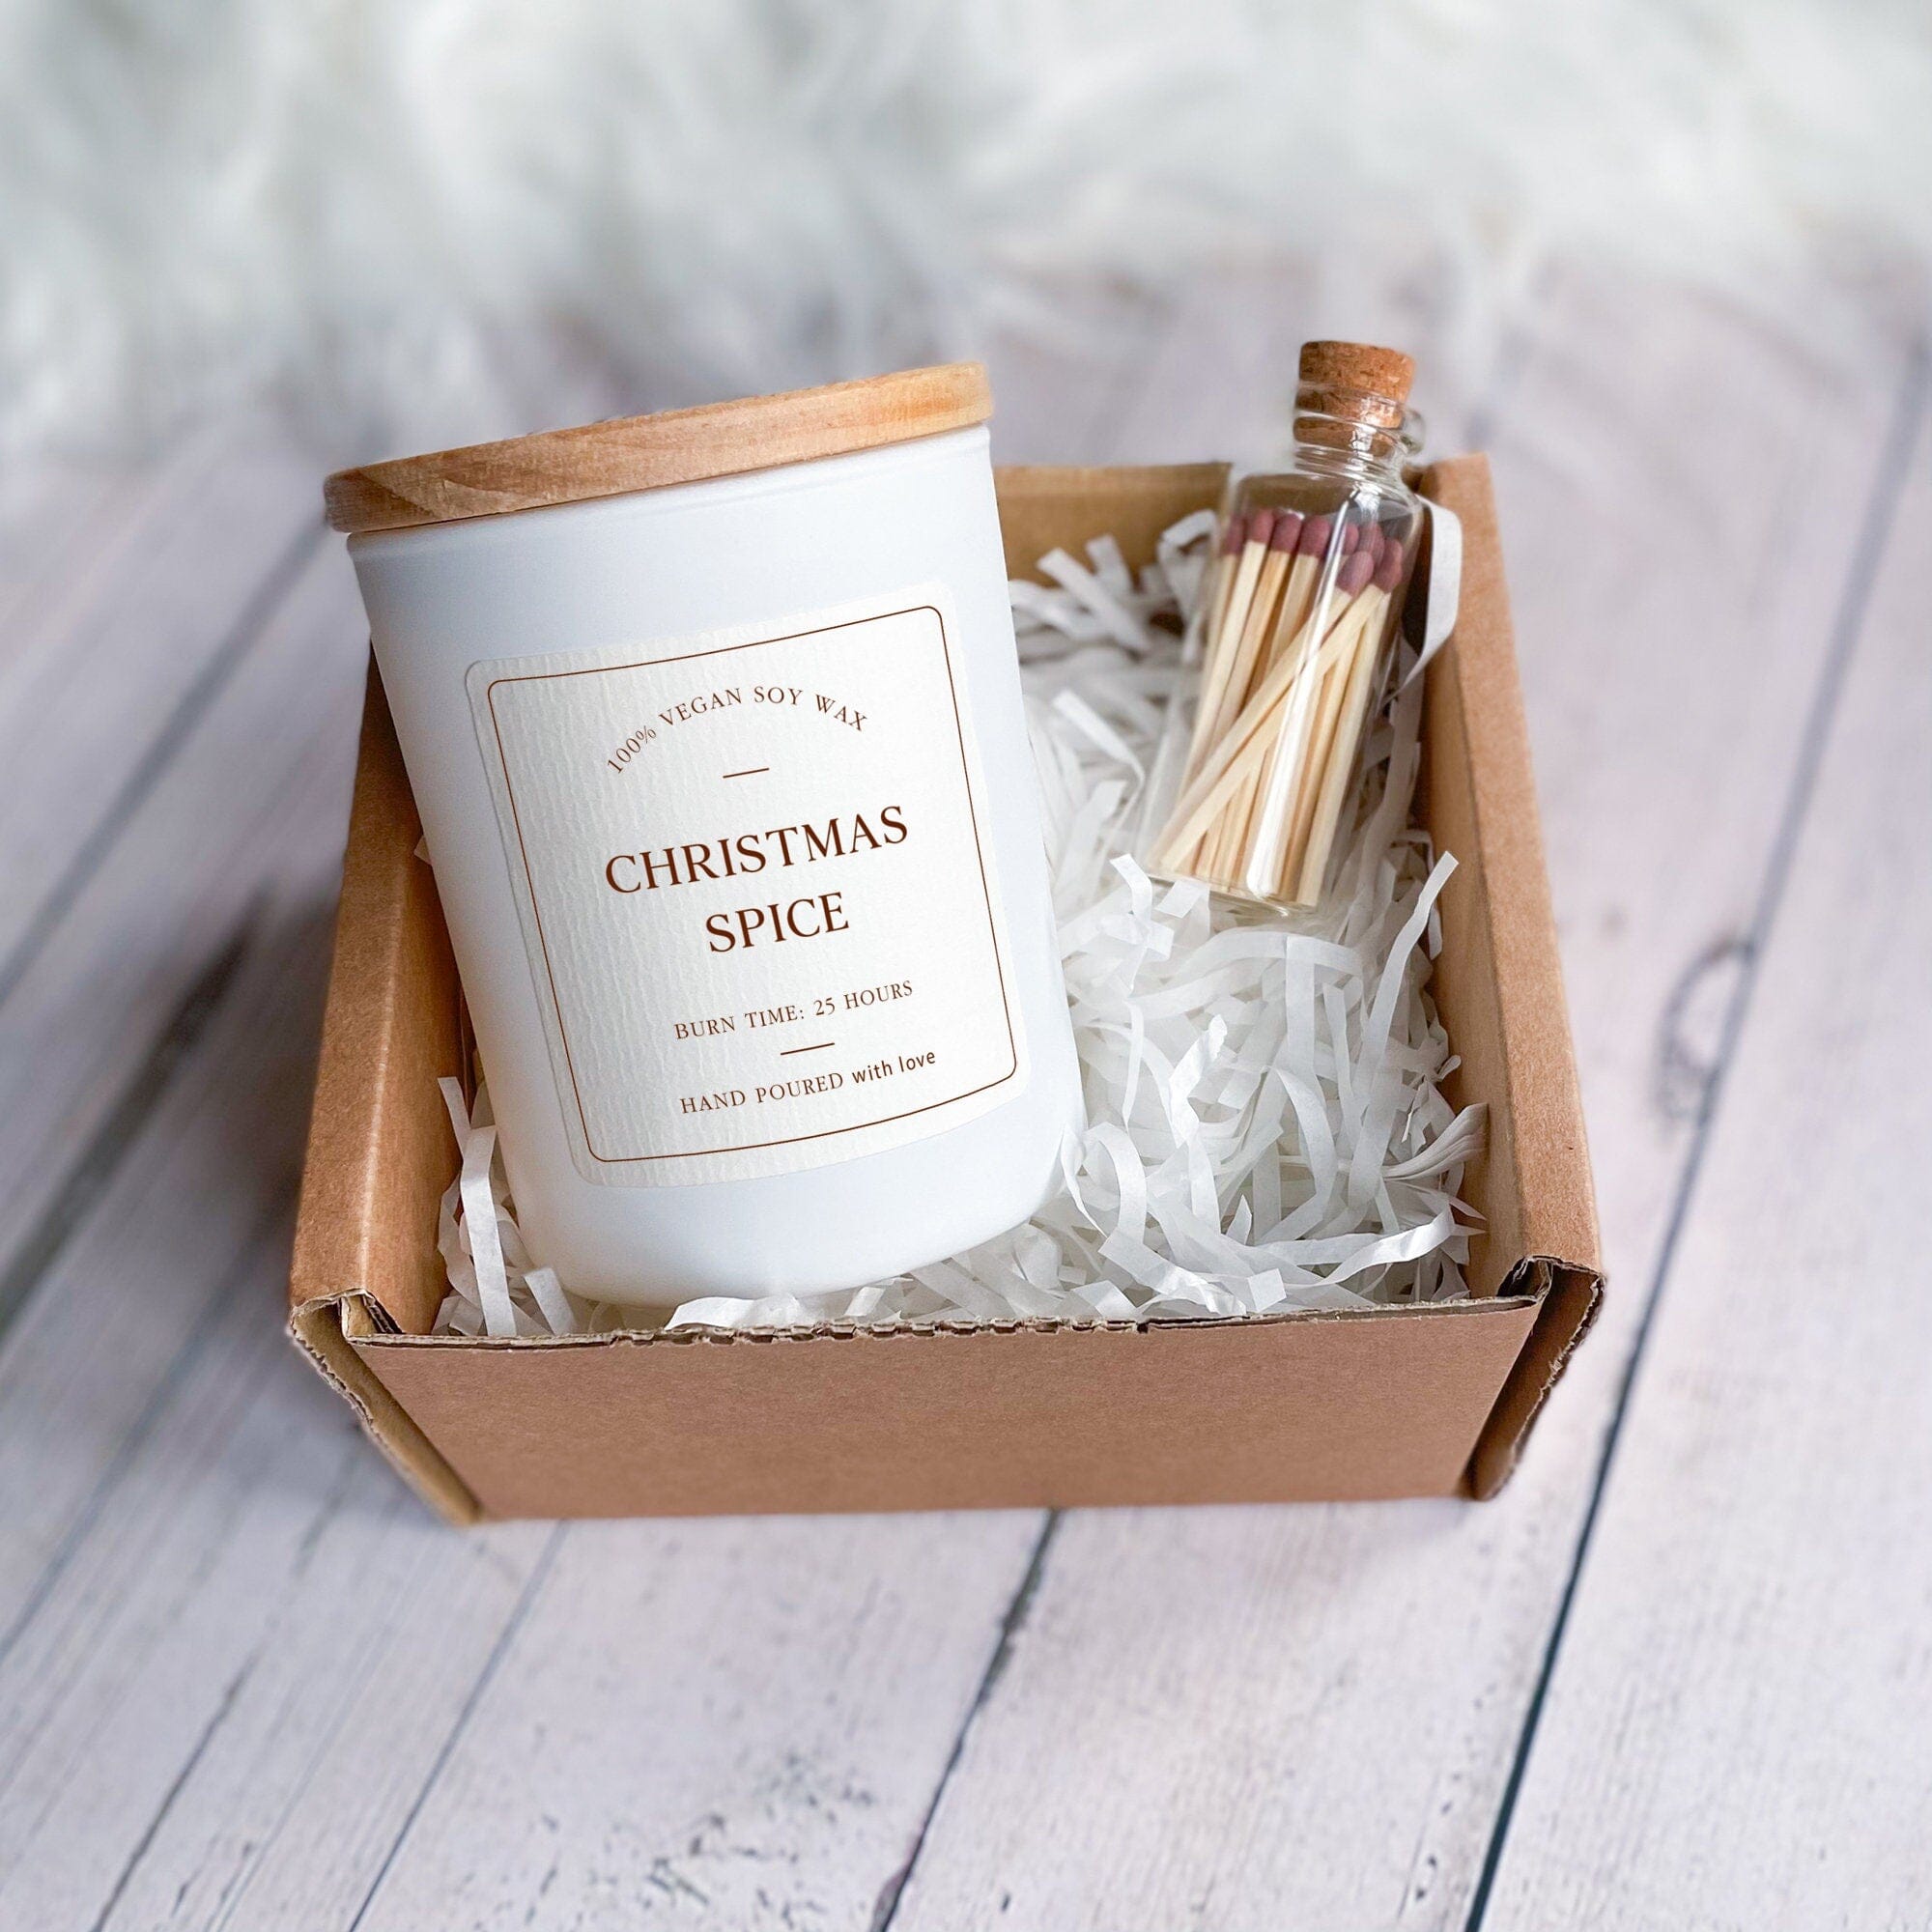 Scented candle with wooden lid and matches in a jar, Christmas Gift for Her, Christmas Spice Pumpkin Spice Gingerbread